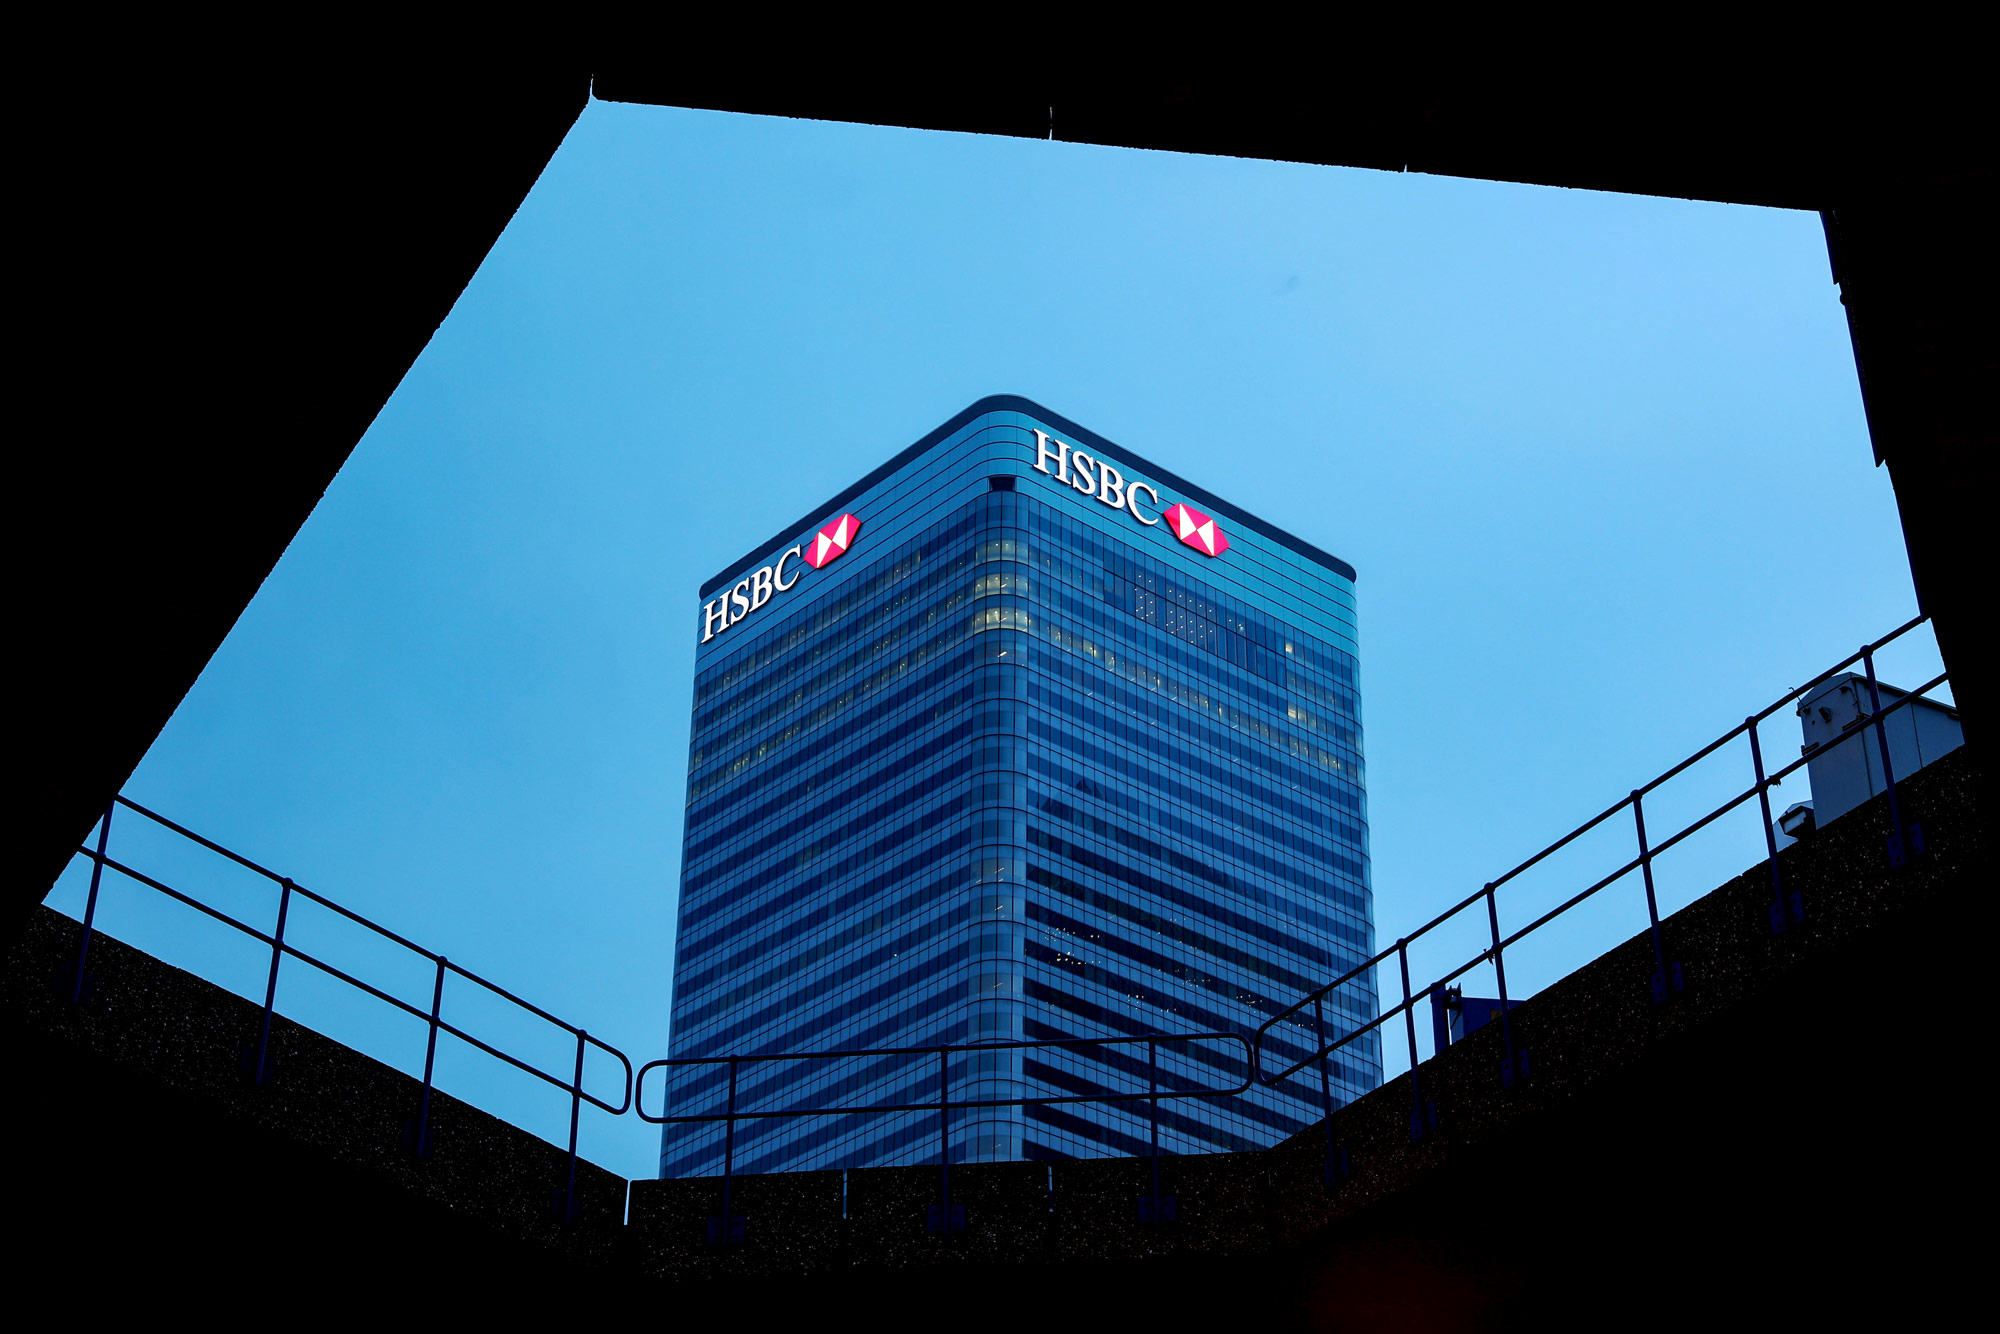 HSBC Holdings Plc Headquarters And Branches As Banks Seeks To Stop Slump In Revenue